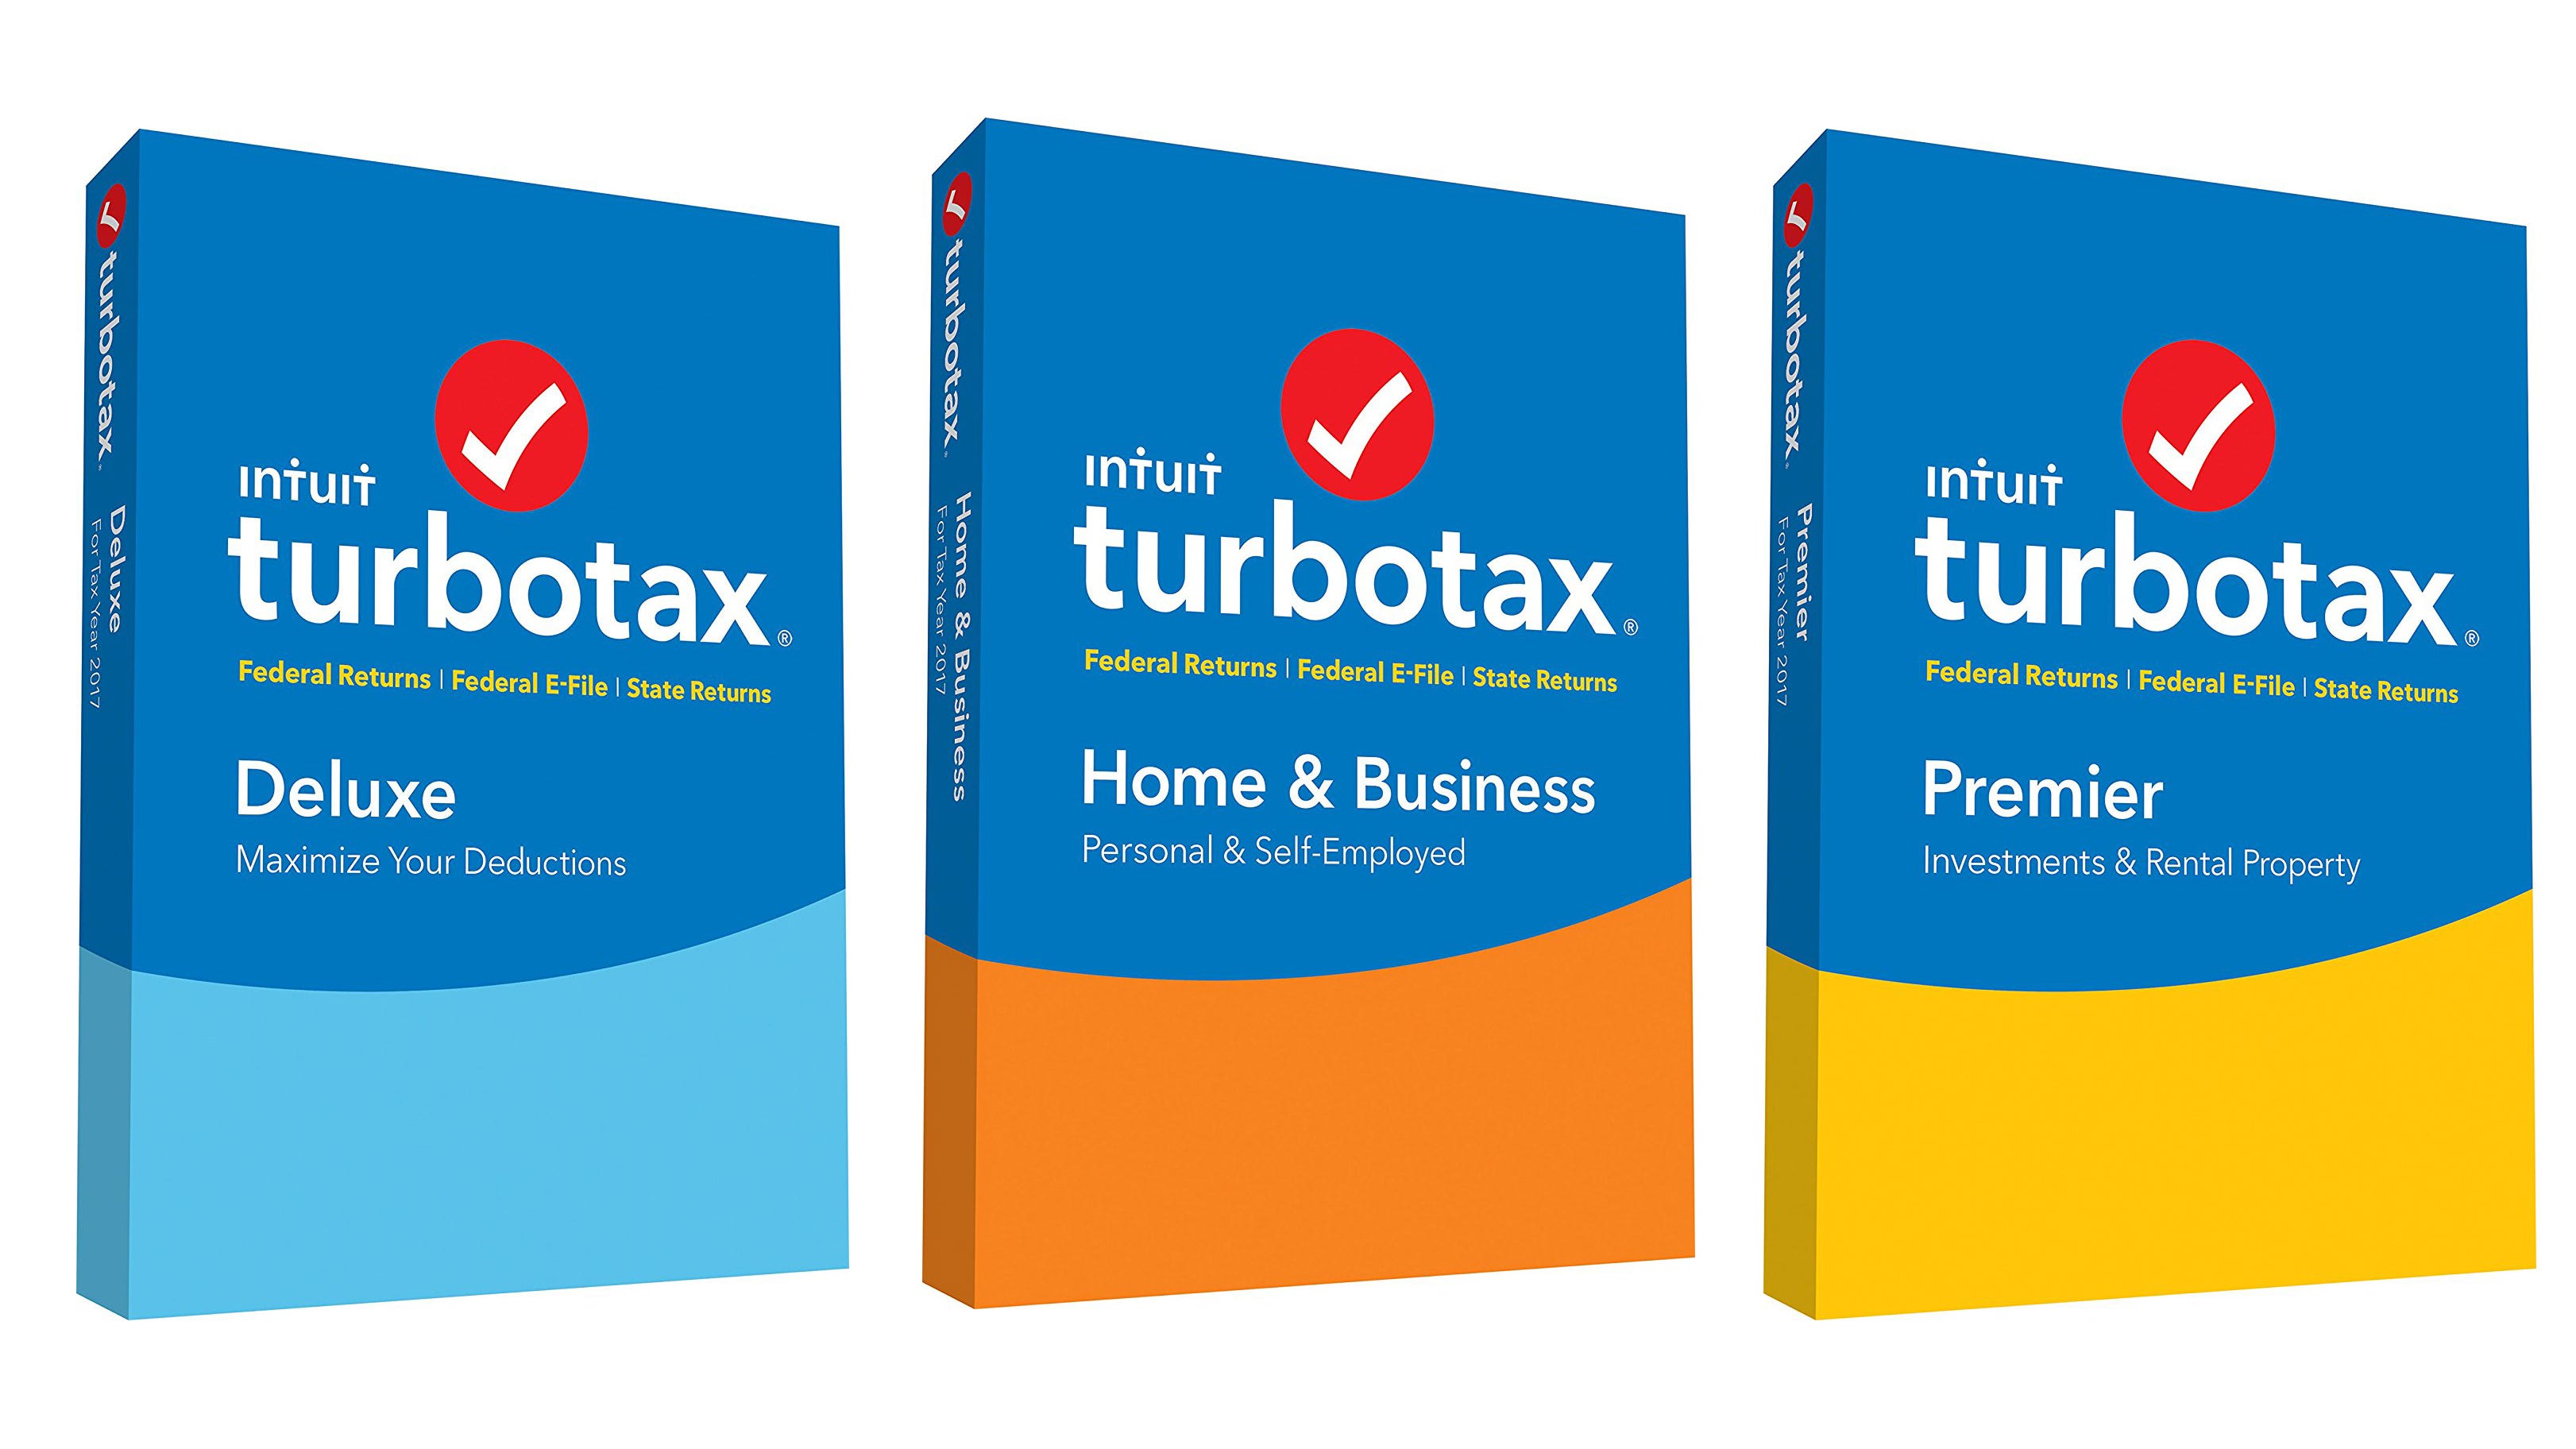 how do i download turbo tax software for 2017